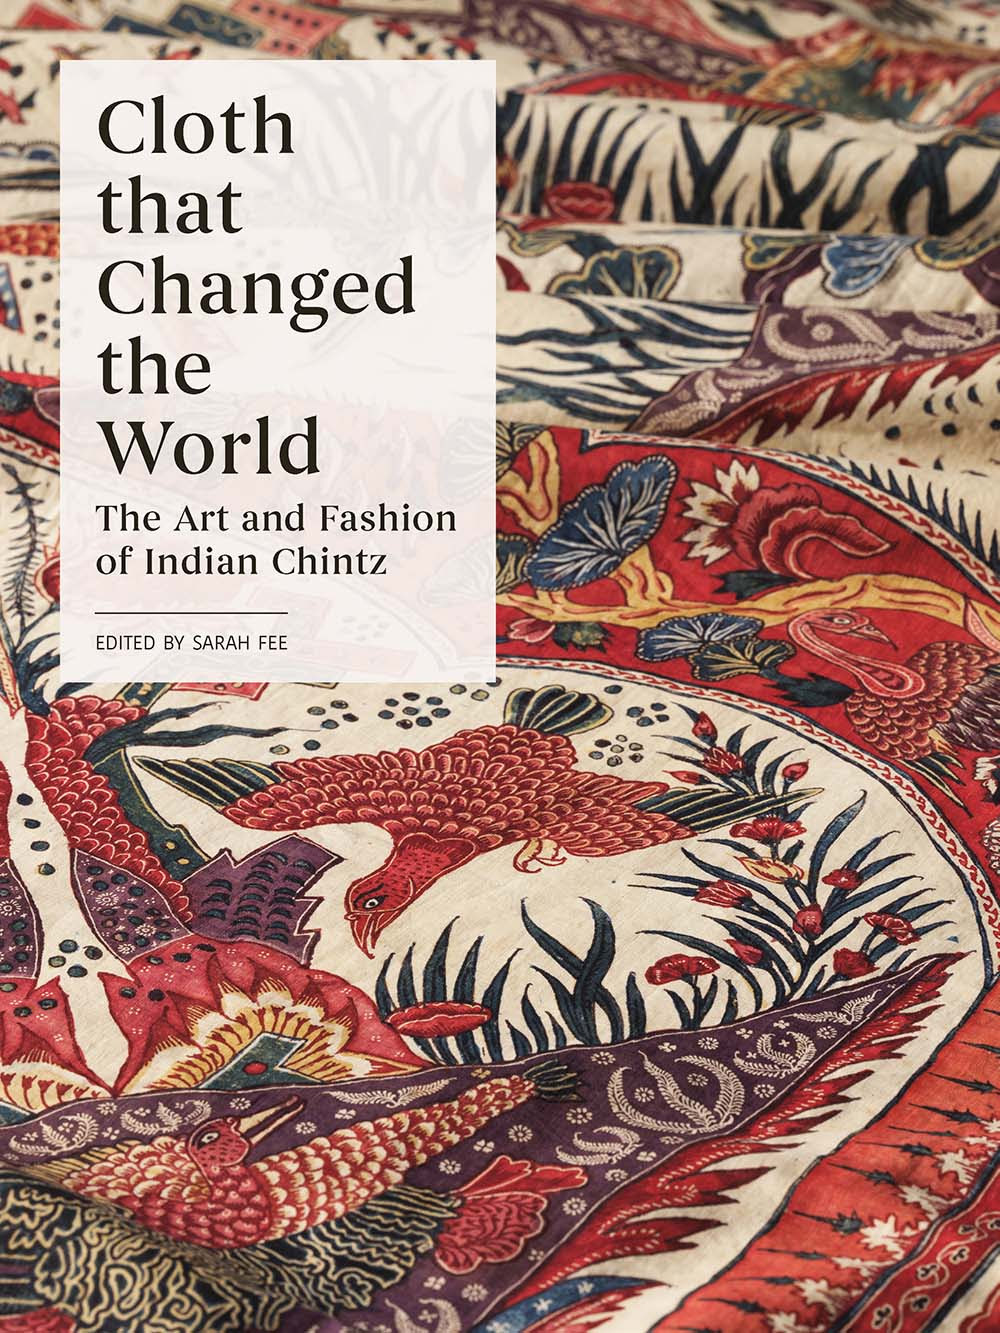 Cloth that Changed the World: The Art and Fashion of Indian Chintz in Kindle/PDF/EPUB